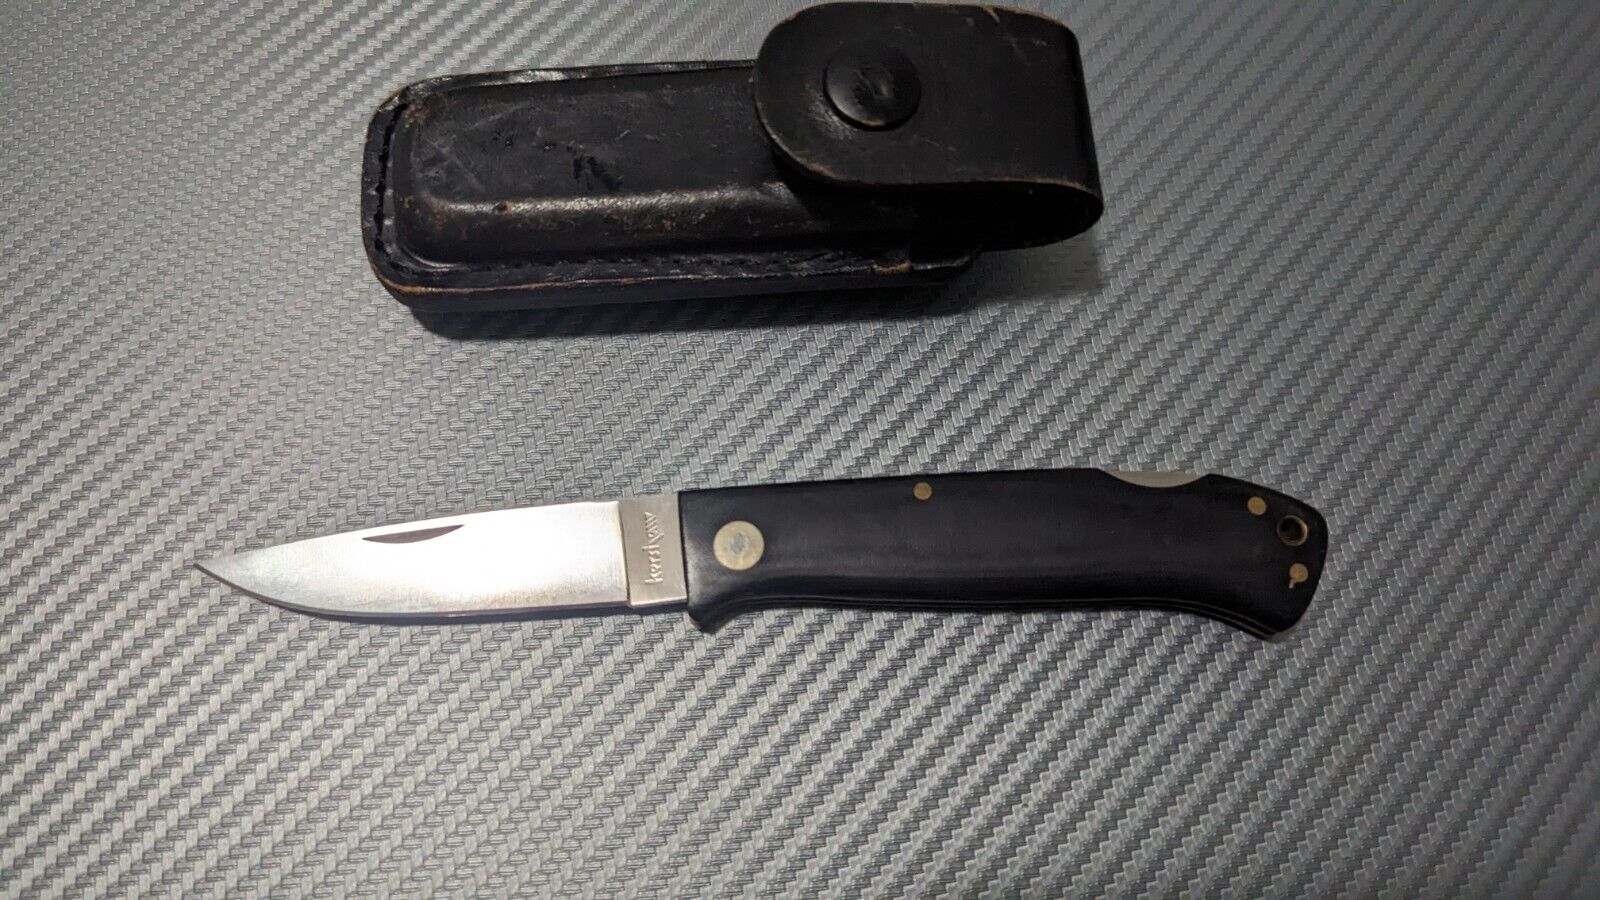 (Extremely Rare) Kershaw 1993-2 Folding Knife Only 600 made